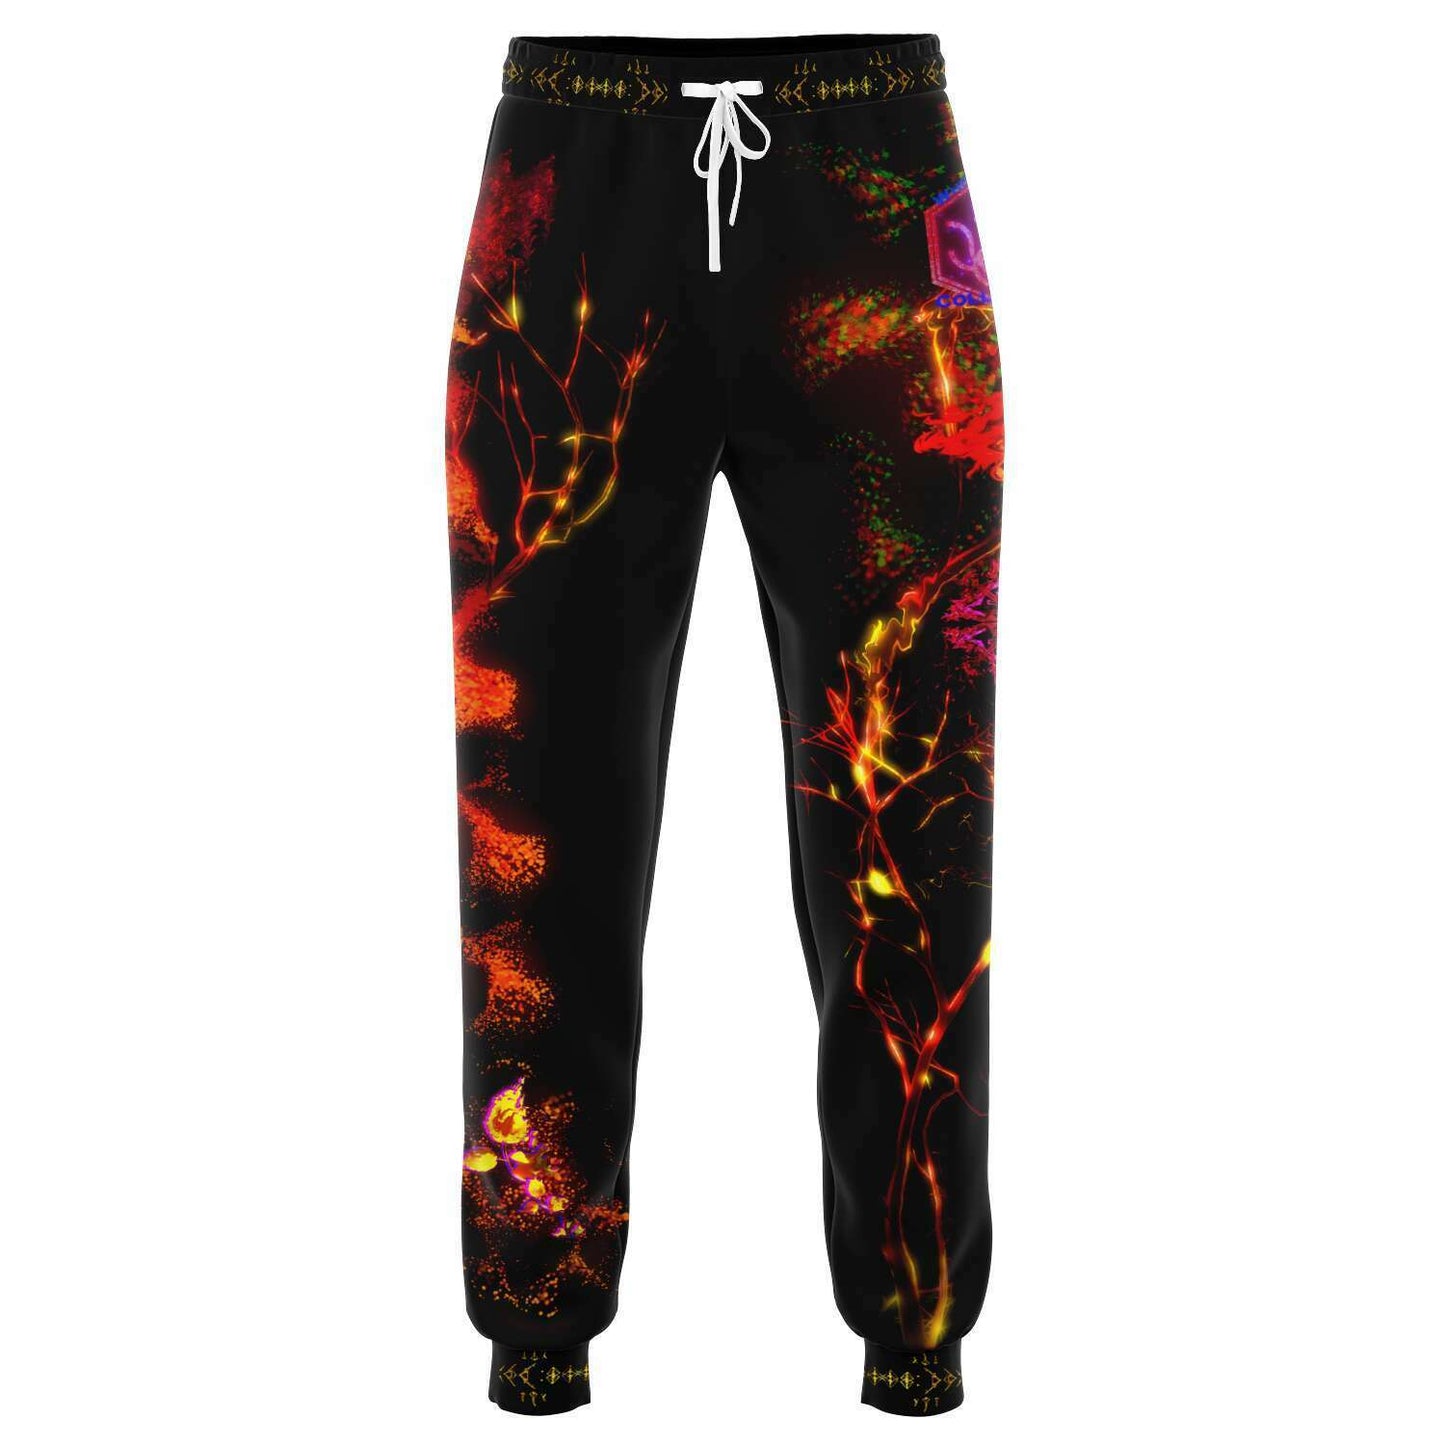 Taiga-Zoku  (Prototype Line) "Amber Forest Embers" Joggers - Who R We Collective